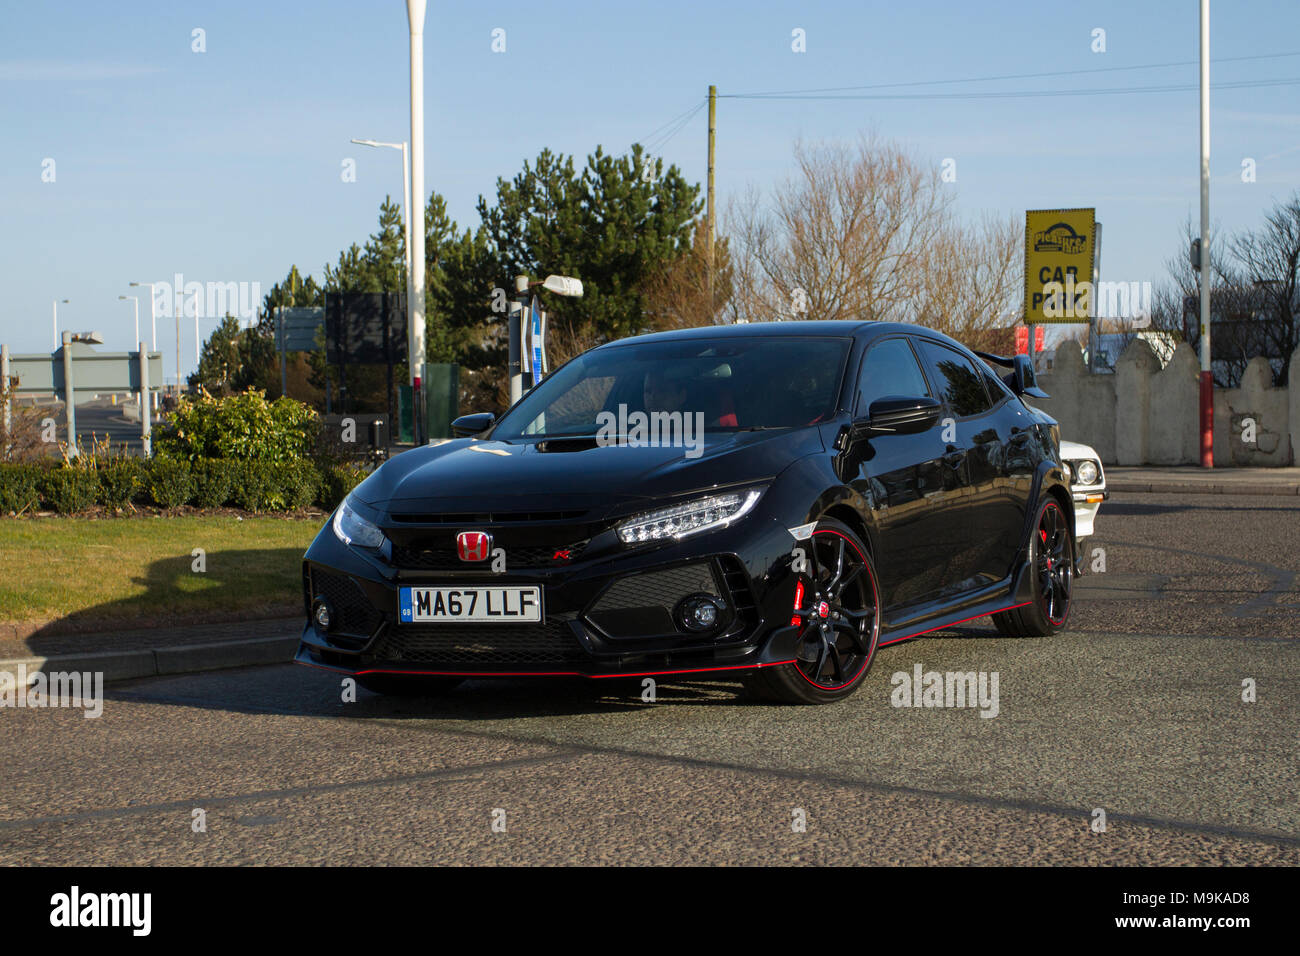 2017 black Honda Civic Gt Type R Vtec 1996cc petrol hatchback at the  North-West Supercar event as cars and tourists arrive in the coastal resort  on a warm spring day. SuperCars are